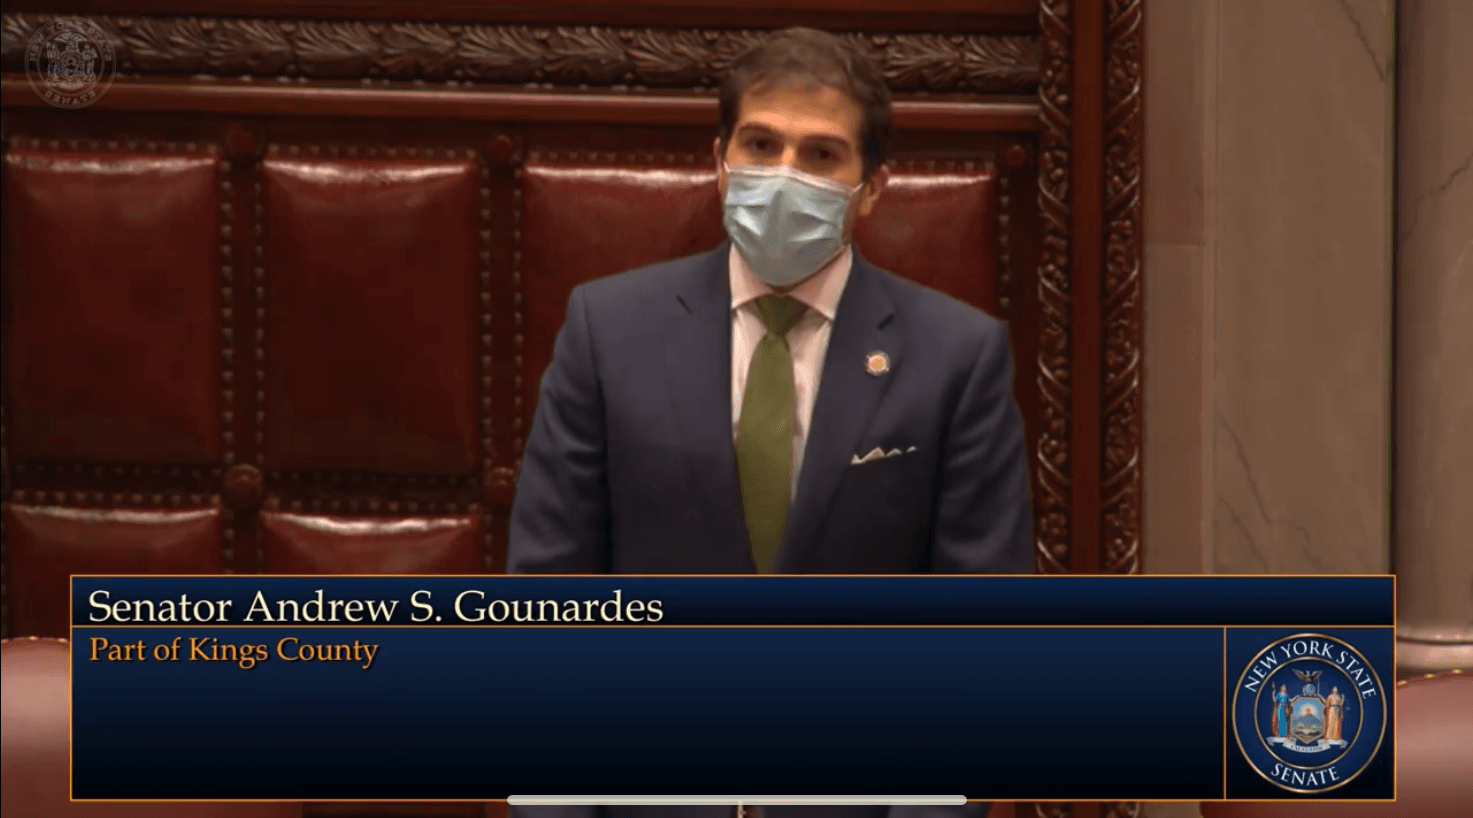 Gounardes, Abbate pass bill to provide benefits to families who lost public employee to COVID-19